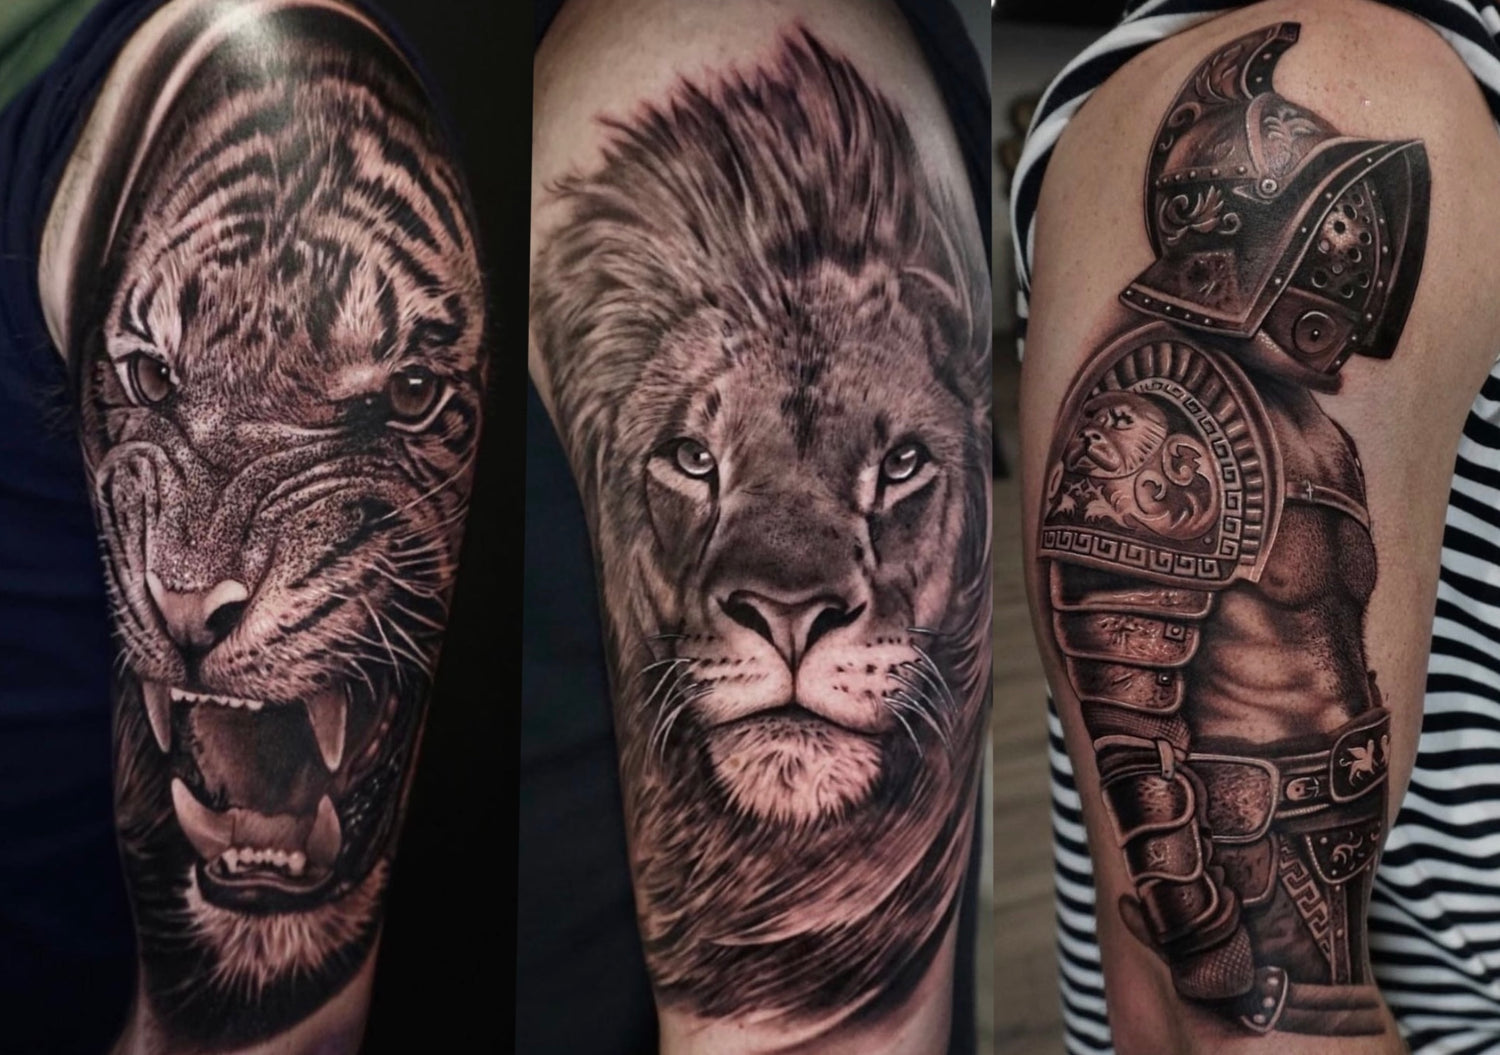 Black and grey realism tattoos colchester